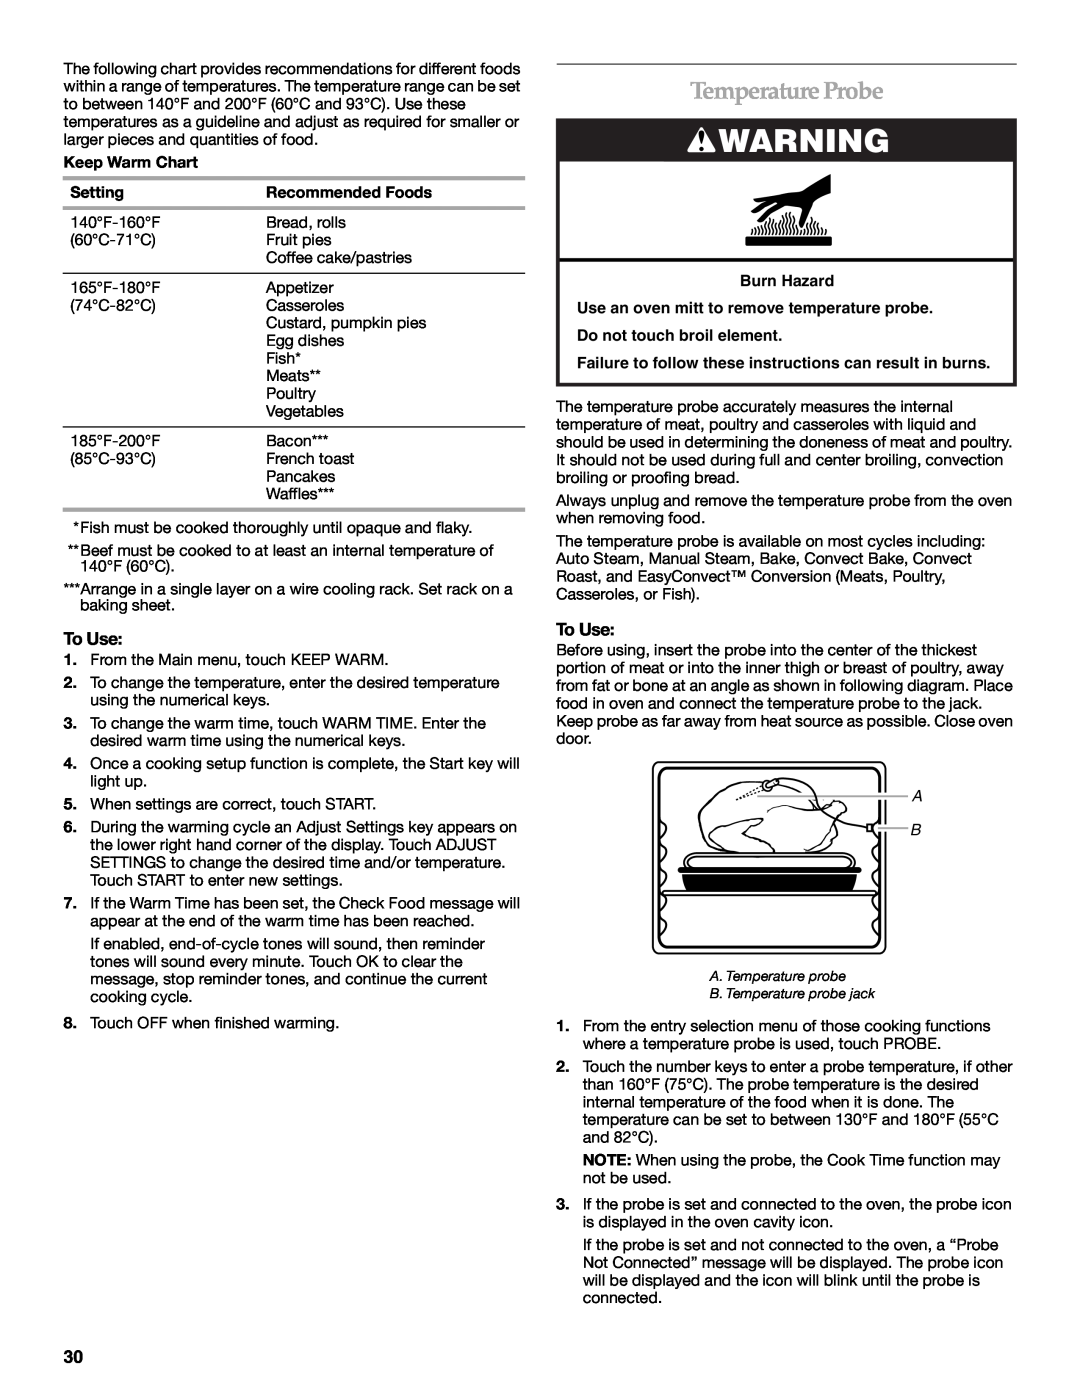 KitchenAid KDRU763.KDRU Temperature Probe, To Use, Burn Hazard, Failure to follow these instructions can result in burns 